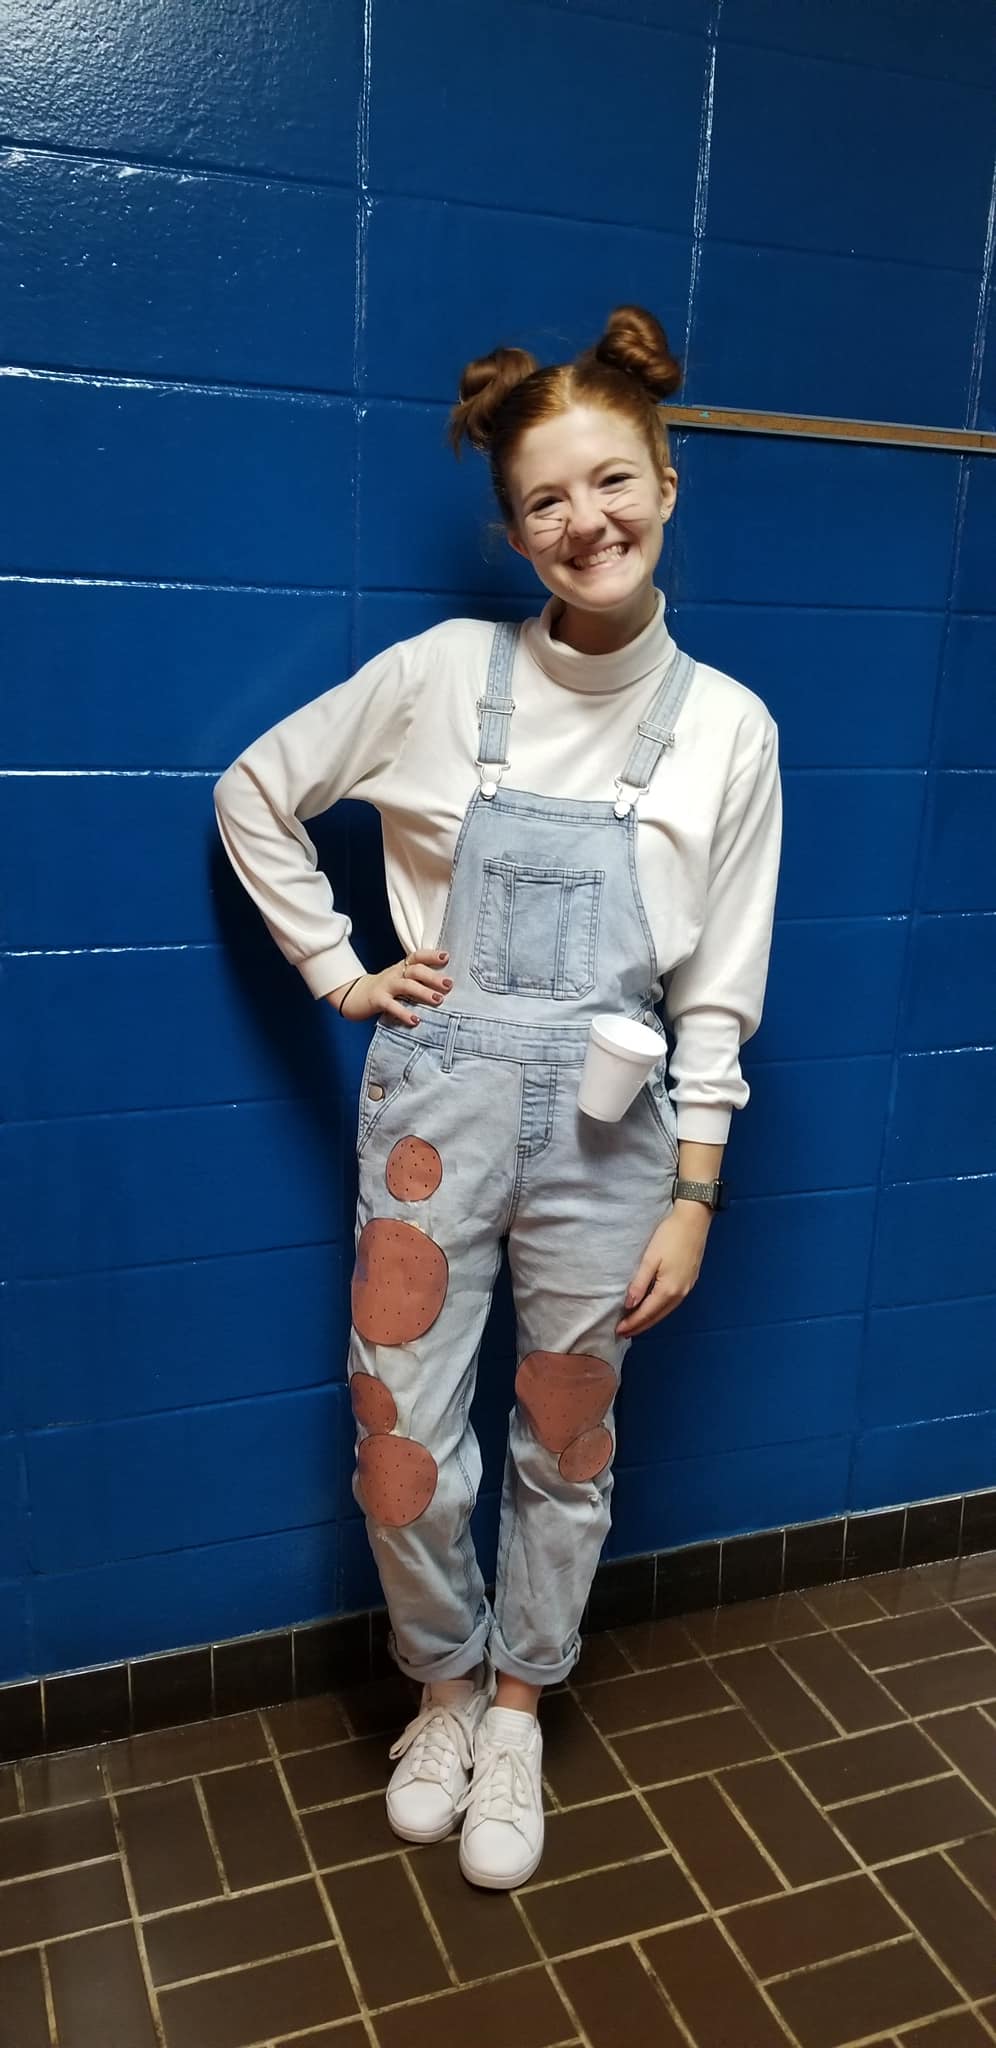 Teacher dressed up for book character day